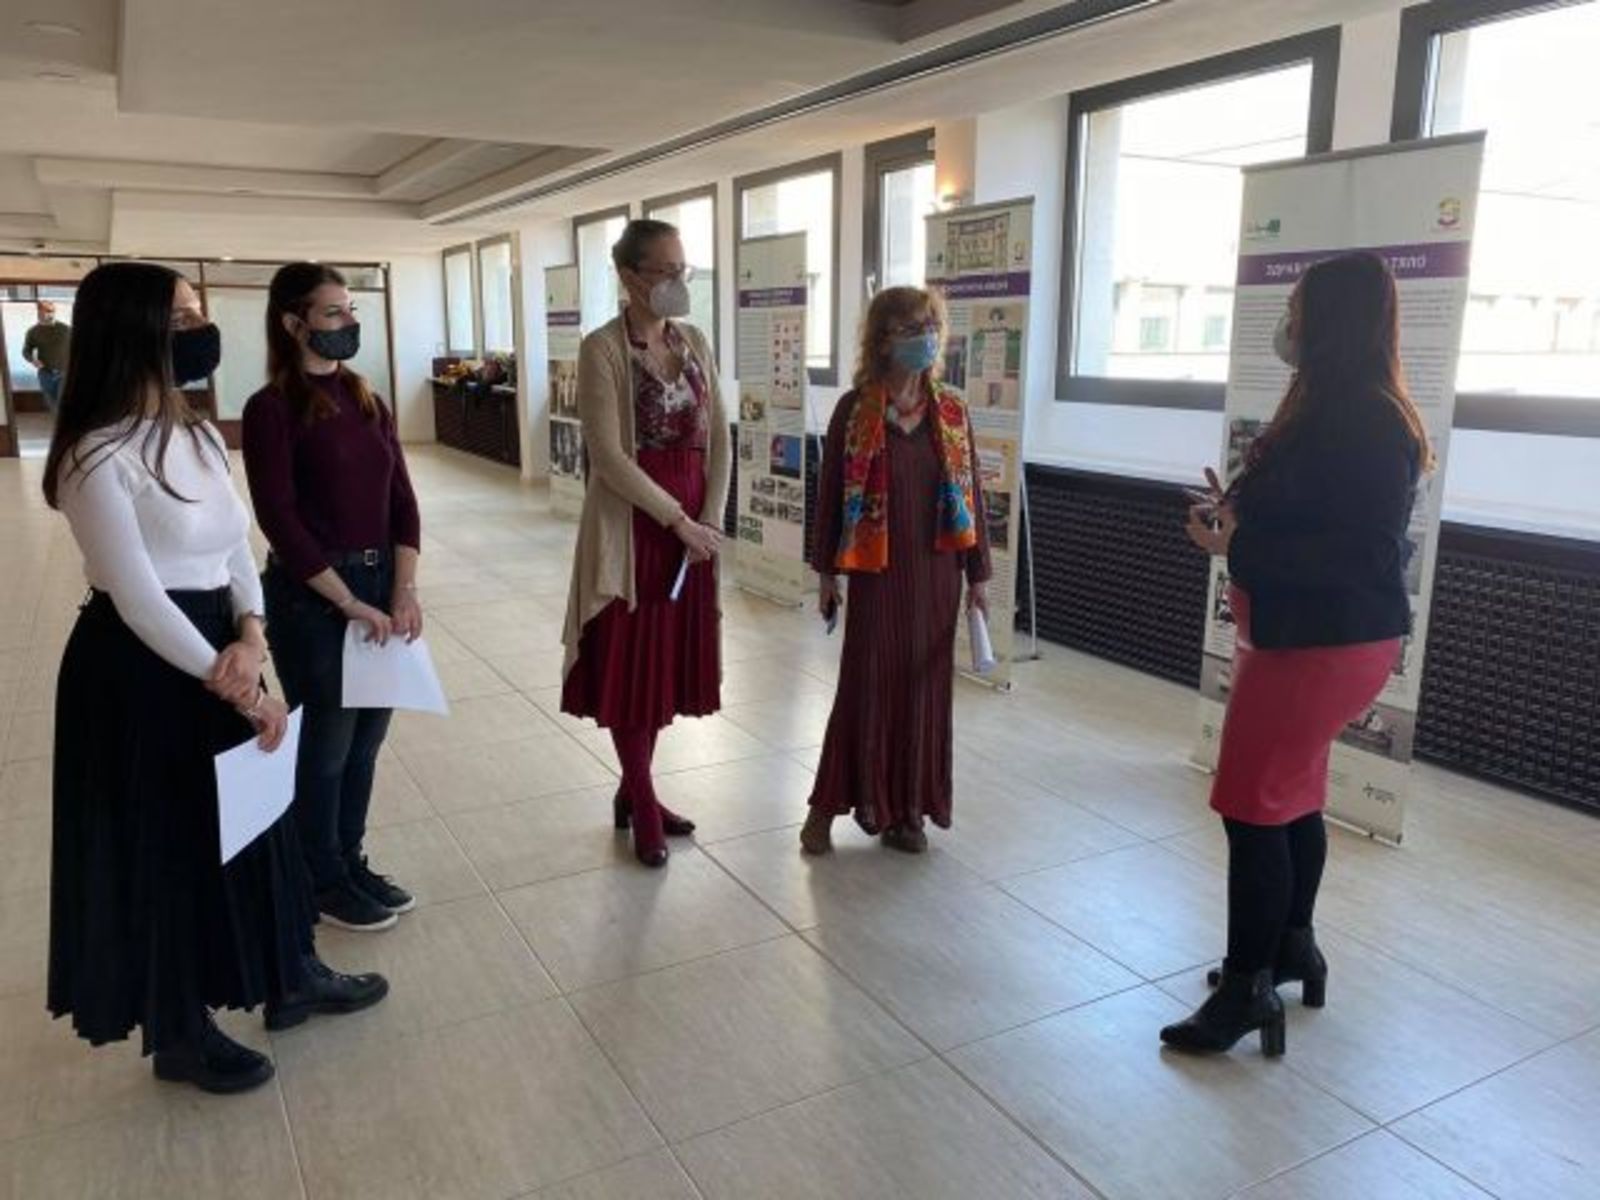 Students, Teachers and Those Interested in the Topic of the Role of Women Visited the Exhibition "Significant Women in History - from Bratislava to Ruse" at the Ministry of Foreign Affairs